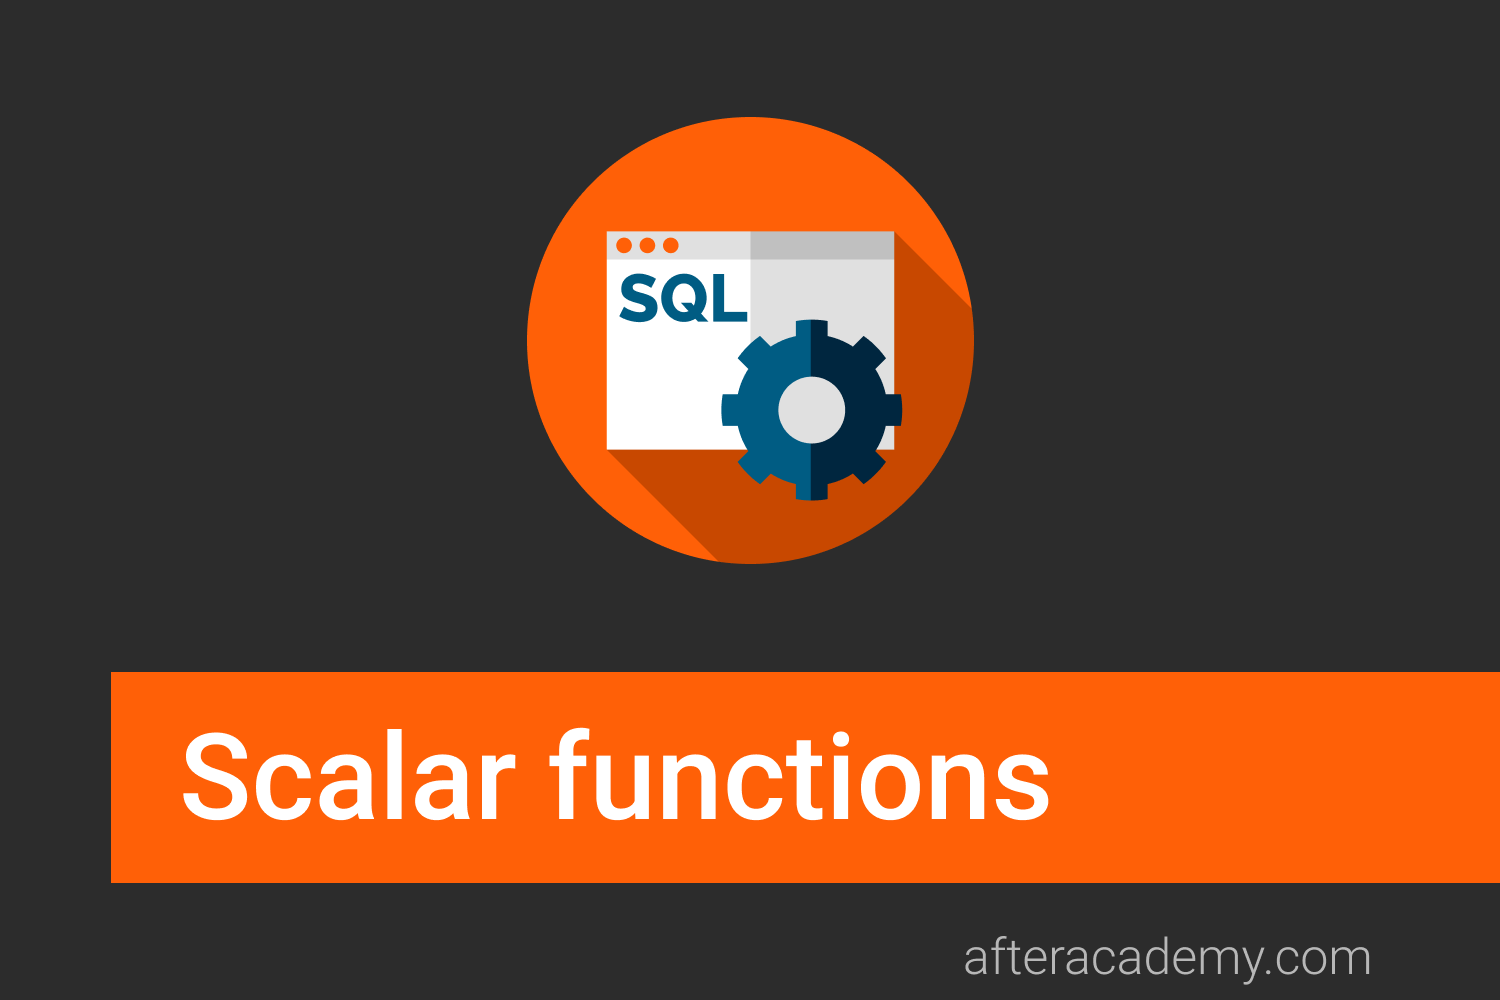 What are Scalar functions?